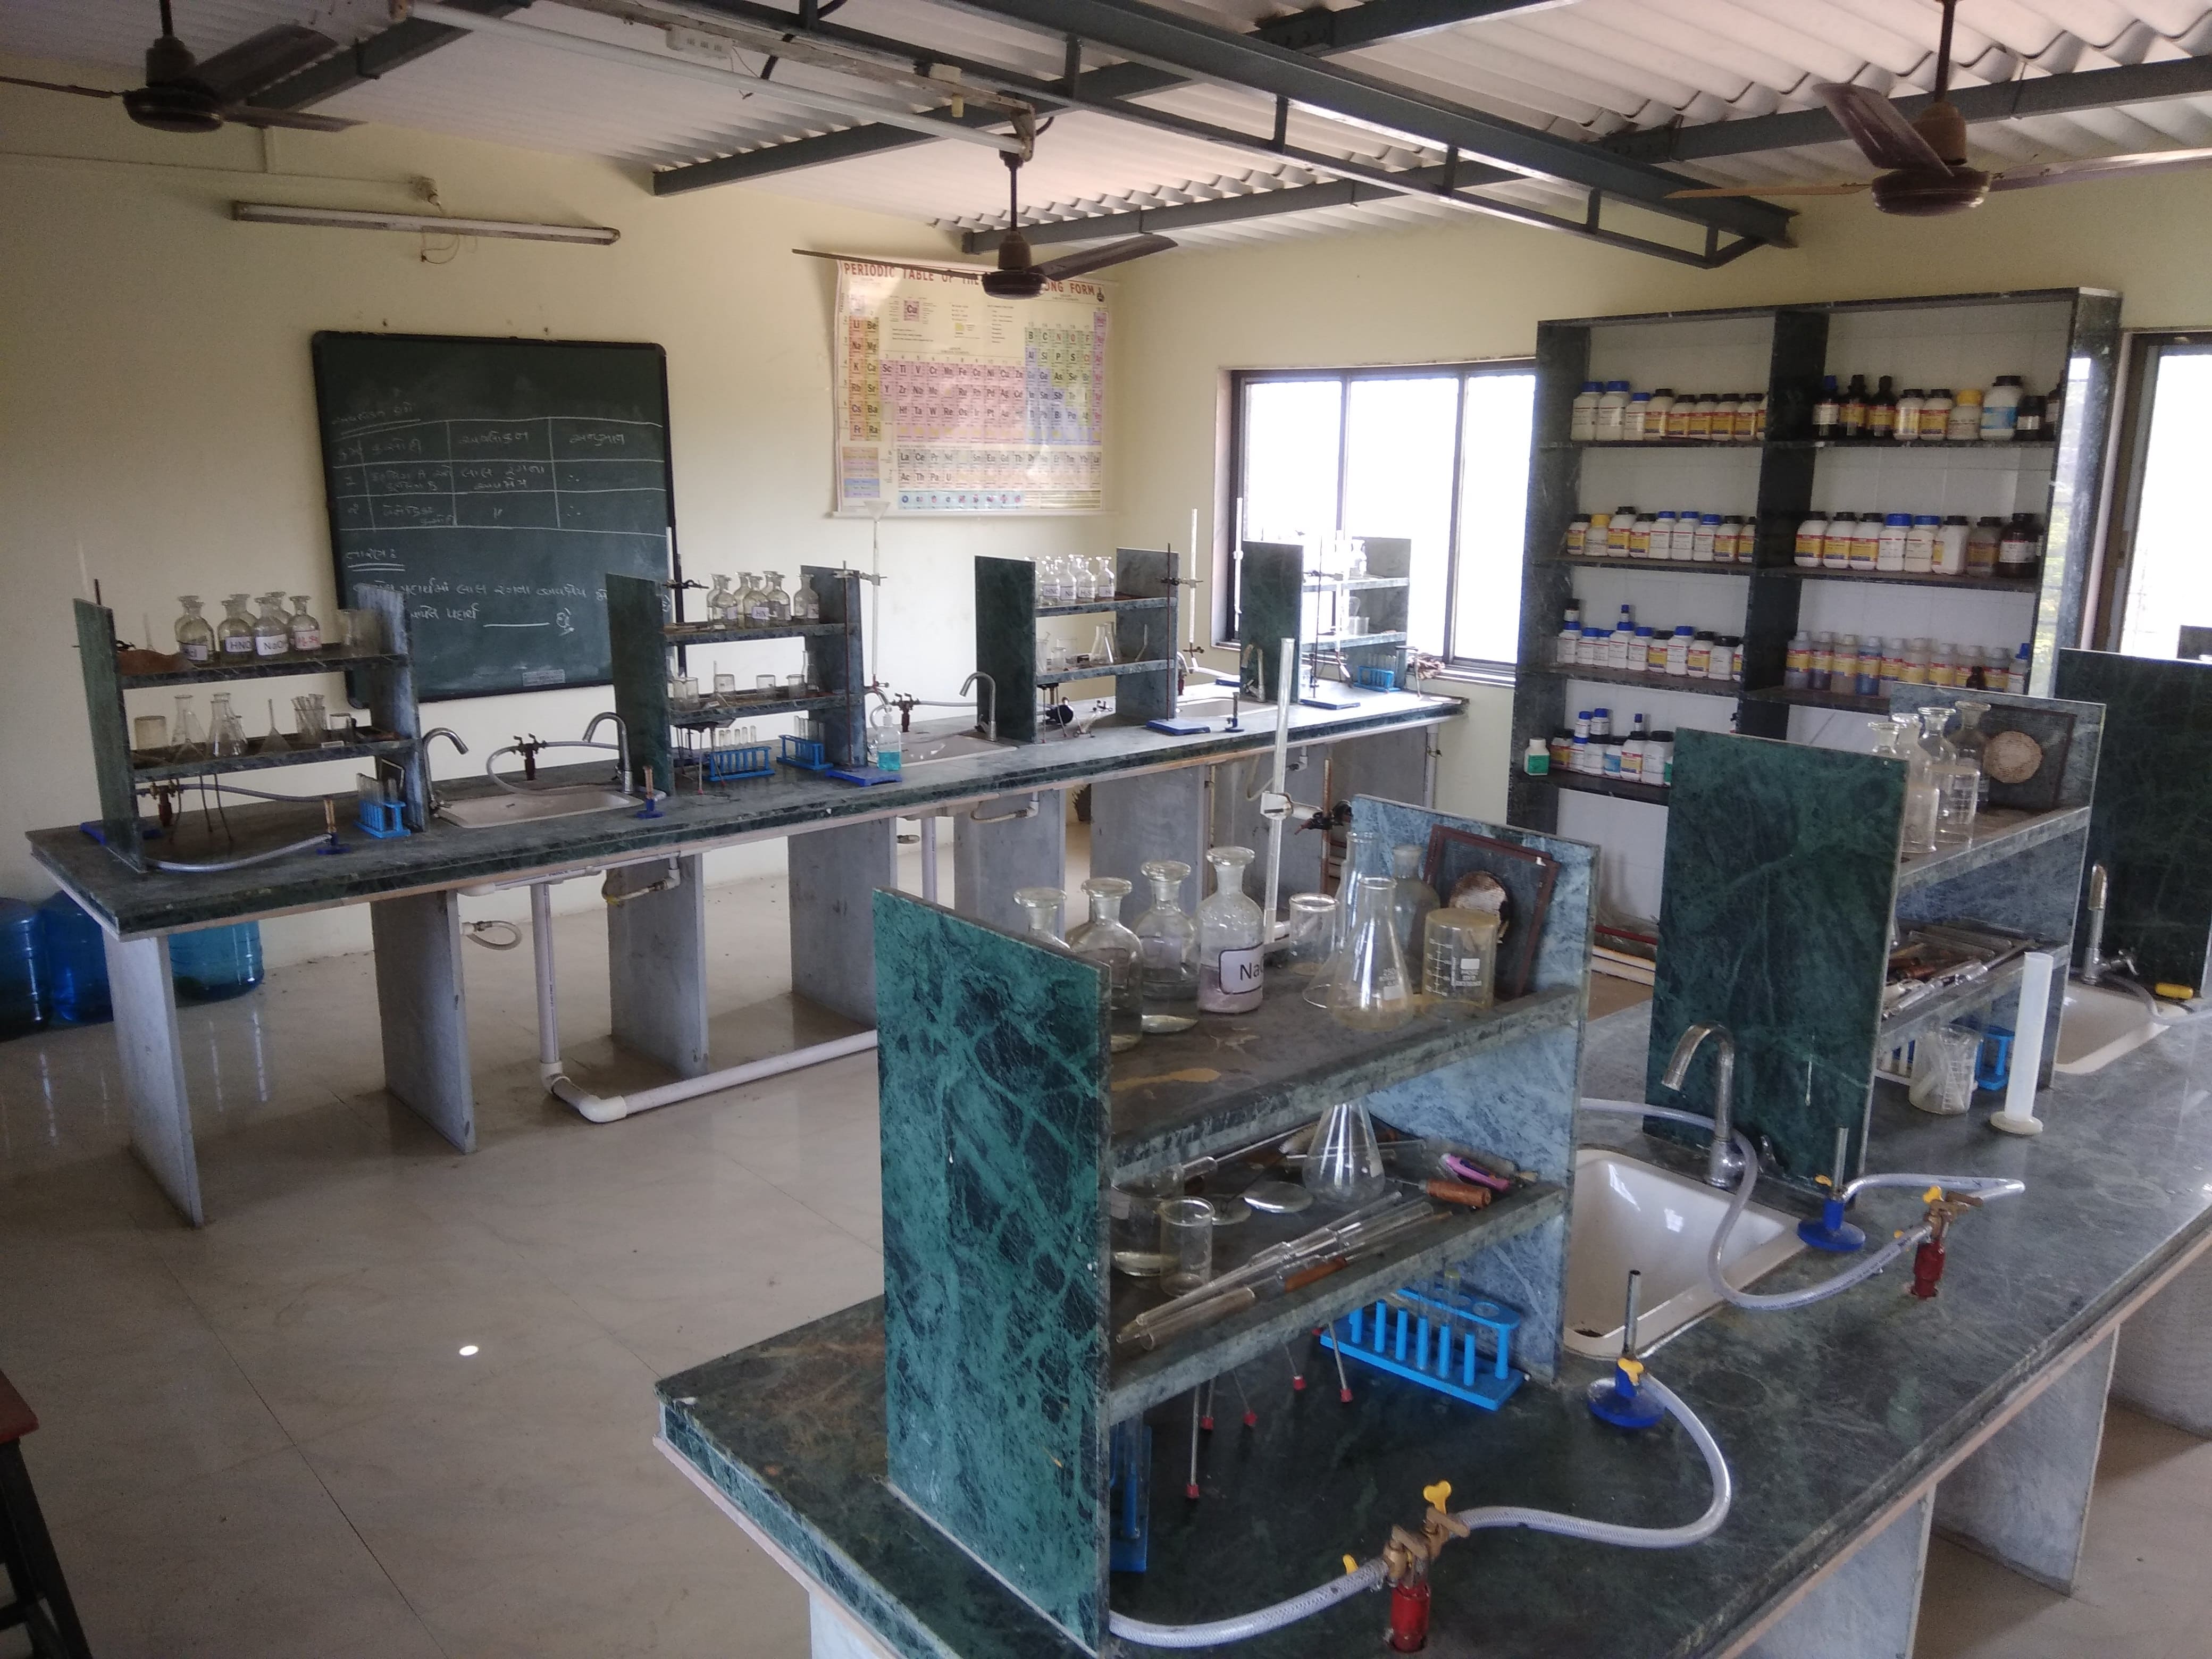 View of one of the Science Lab